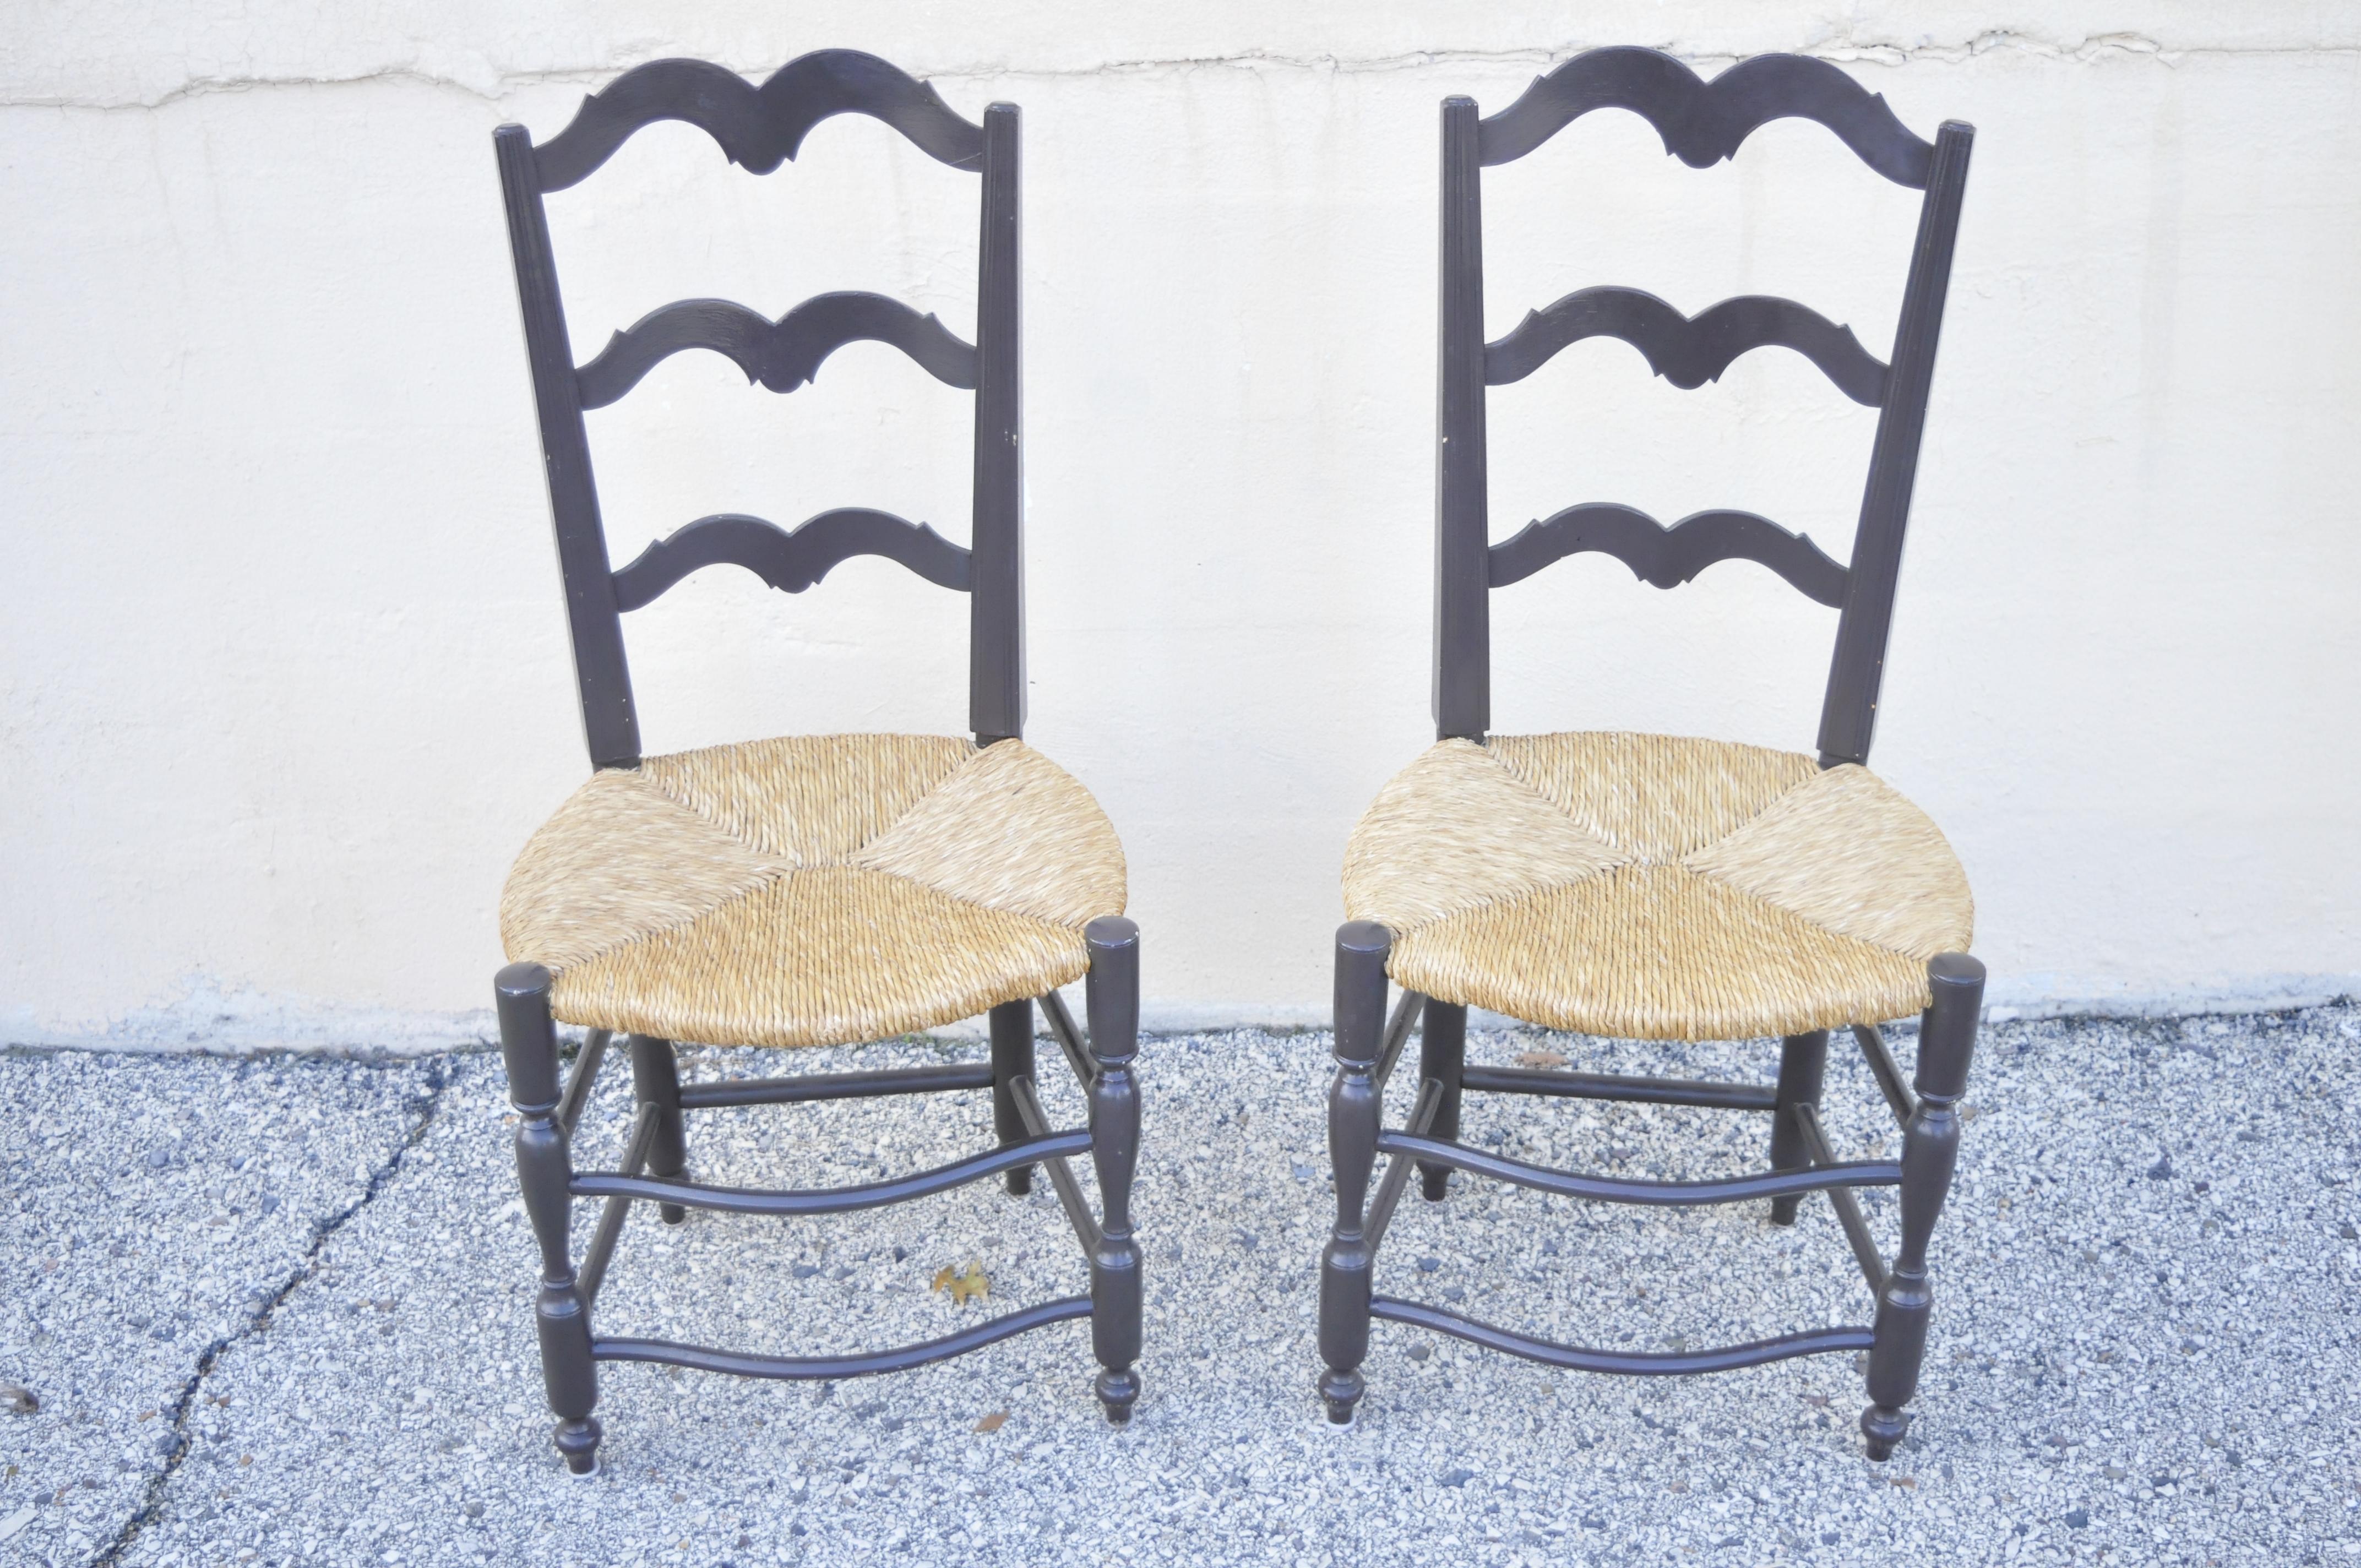 Vintage French Country provincial ladder back rush seat dining chairs signed B. Carles, set of 6. Item features woven rush seats, (6) side chairs, stretcher base, shaped ladder backs, solid wood frame. Nice smaller size chairs. Signed B. Carles to